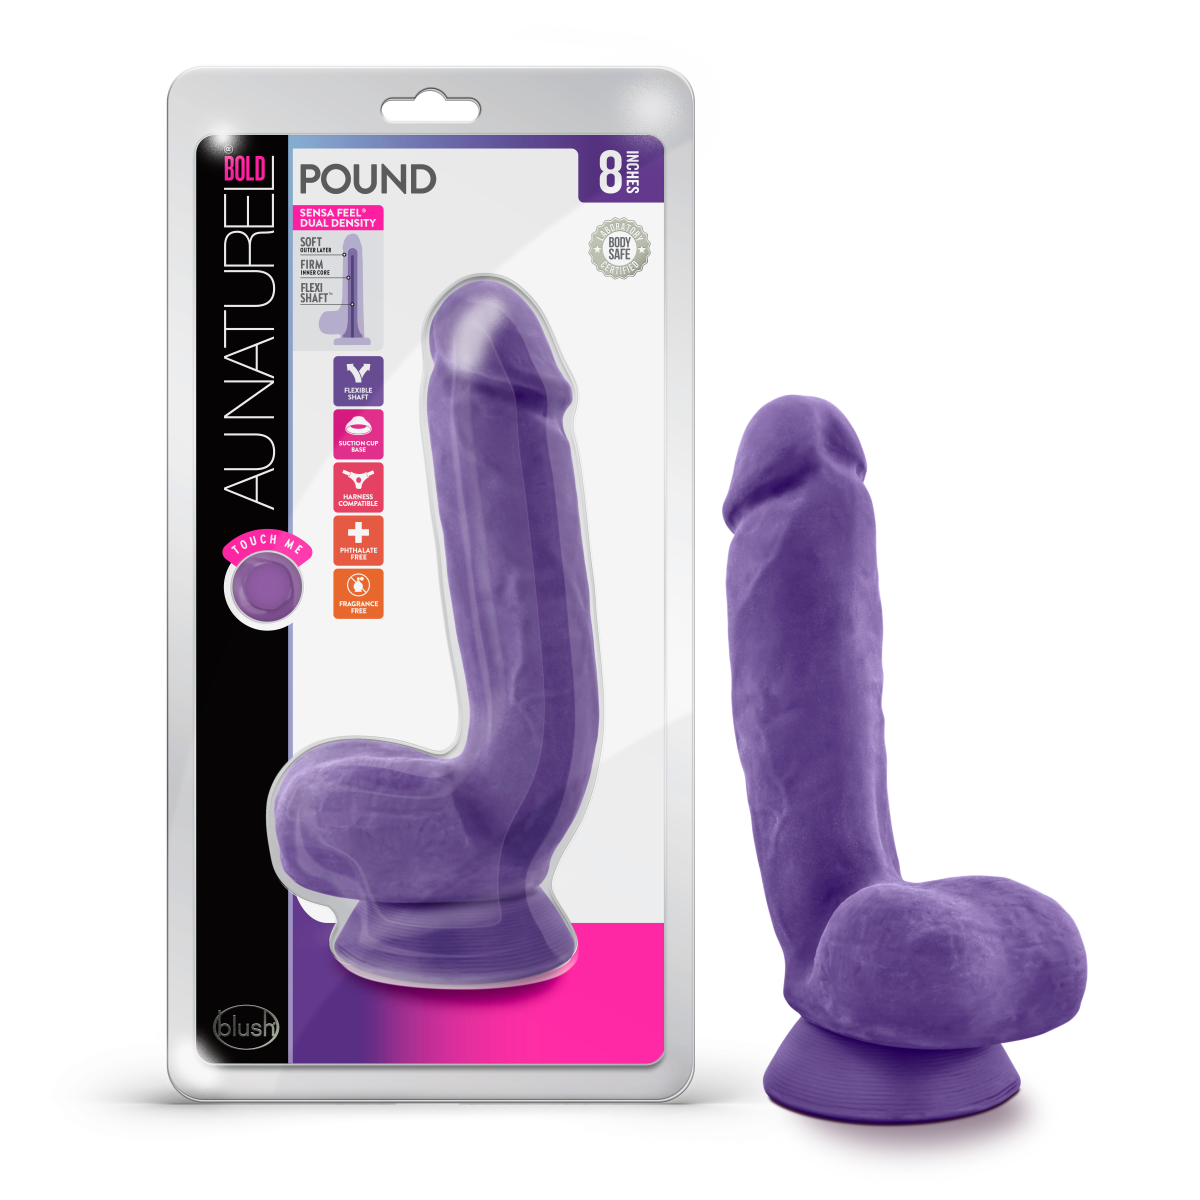 Au Naturel Bold Pound Realistic Purple 8.5-Inch Long Dildo With Balls & Suction Cup Base